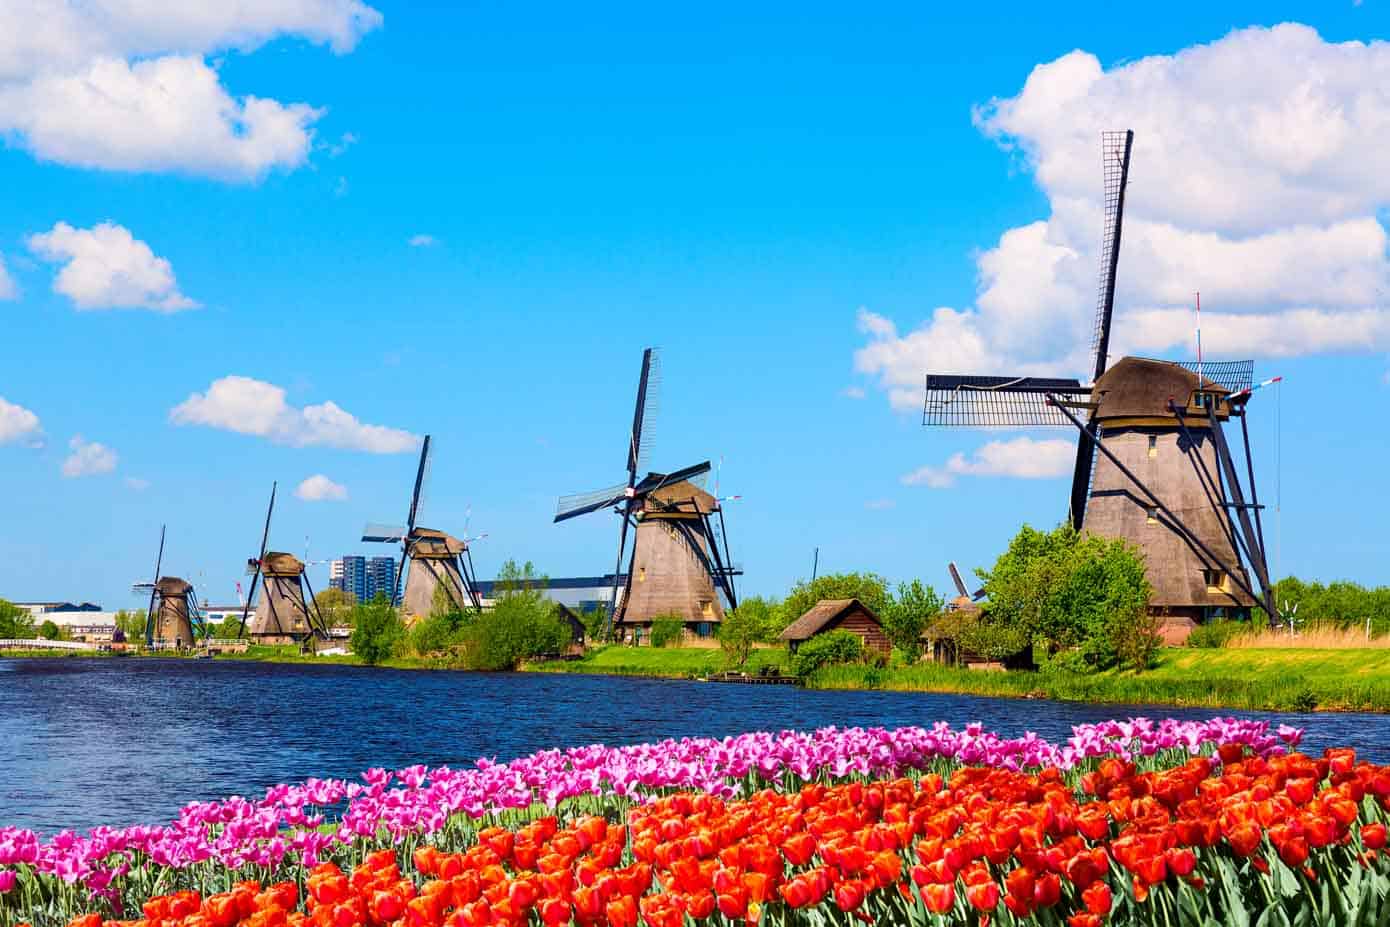 Windmills and tulips lining the water on a sunny day.